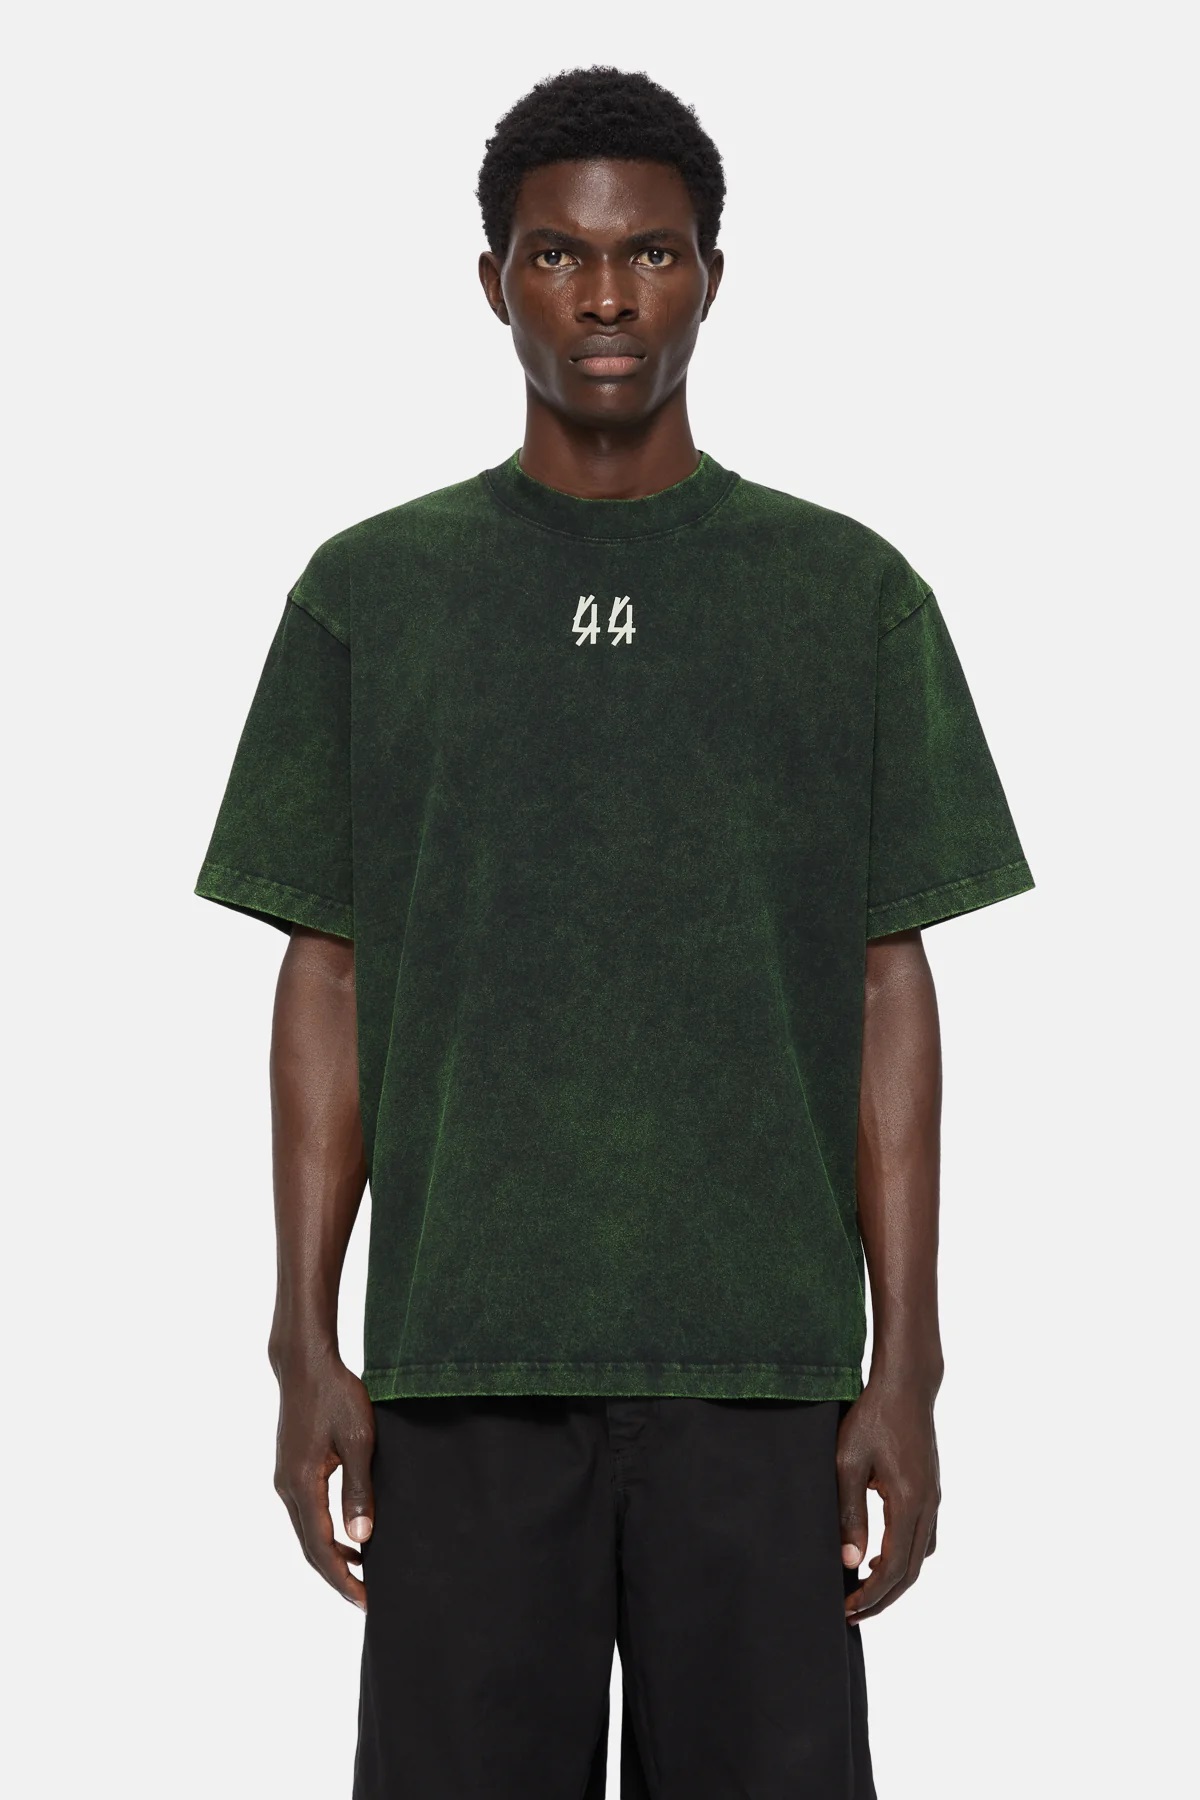 44 LABEL GROUP Overdied Solar Tee in Green L